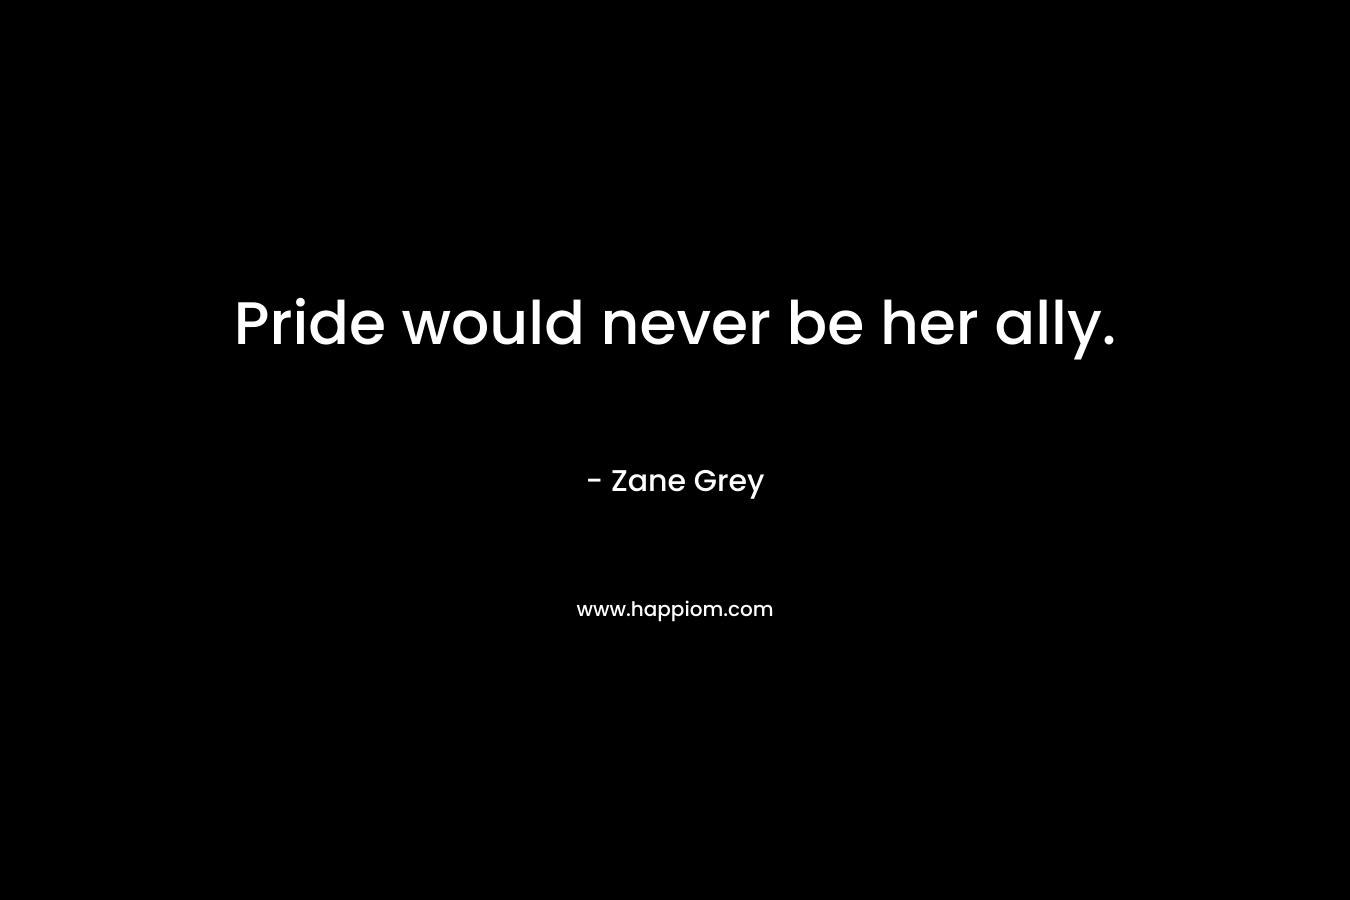 Pride would never be her ally. – Zane Grey